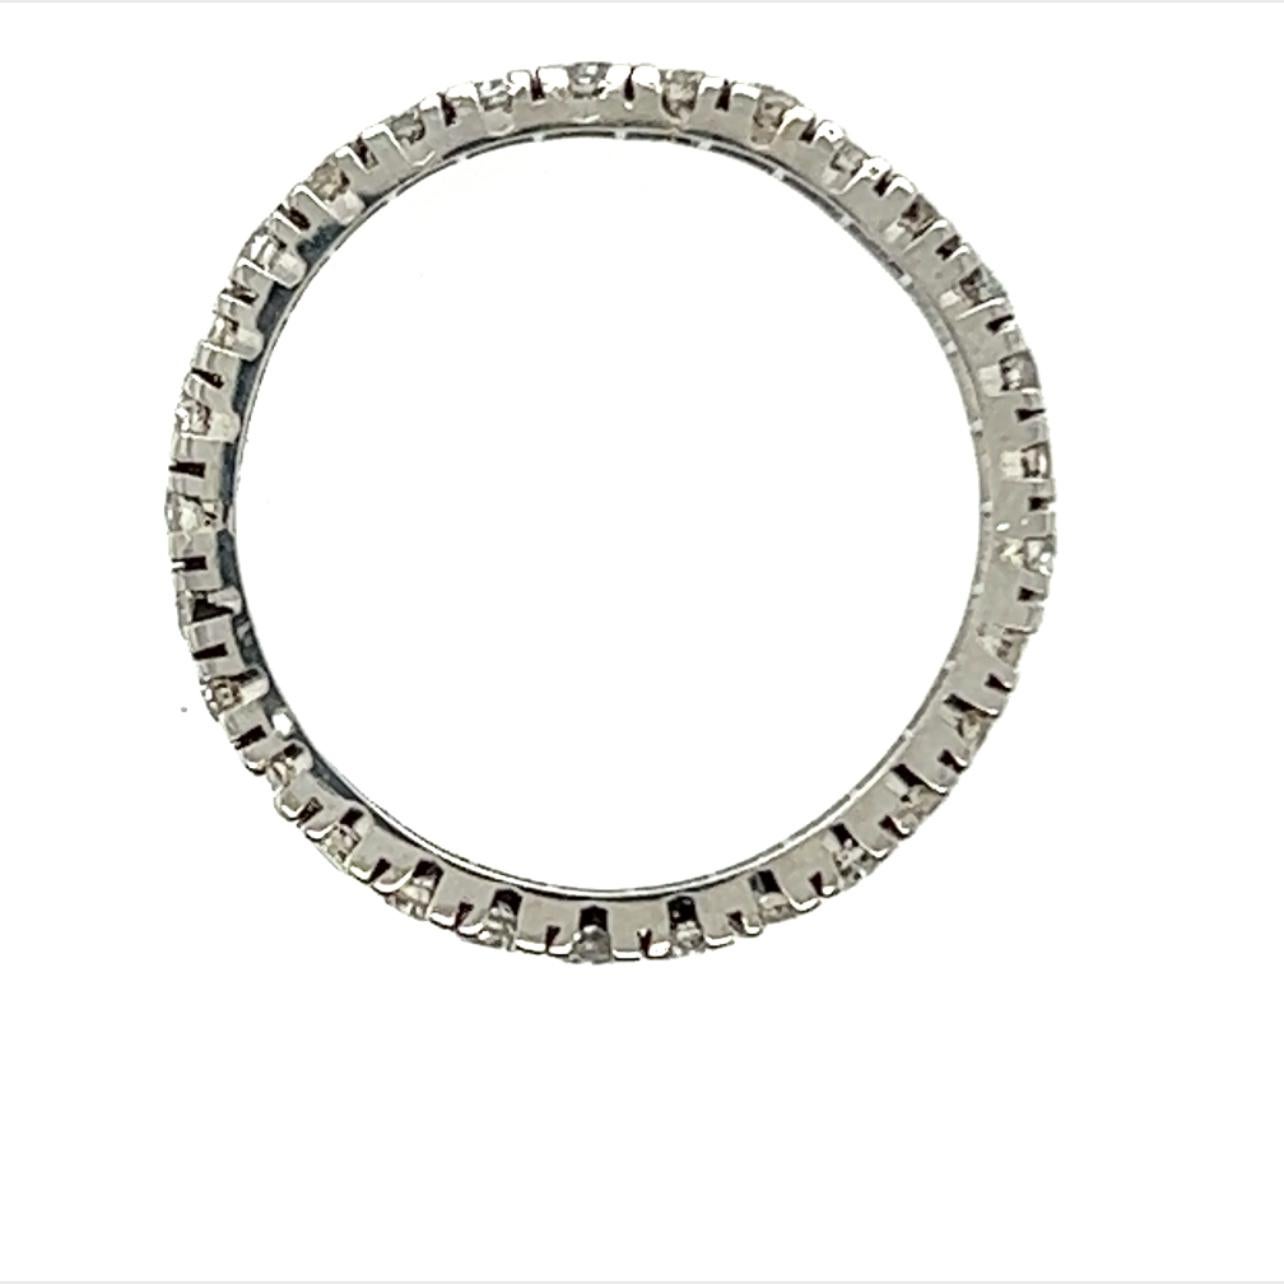 Diamond Anniversary Eternity Band 1.50ct 14K White Gold Wedding Ring



Die Struck Machine Made Band

Solid 14K White Gold 

100% Natural Diamonds

1.50 Carat Diamond Weight

Great Band to Stack

Matches Any Engagement Ring 

Perfect for a Birthday